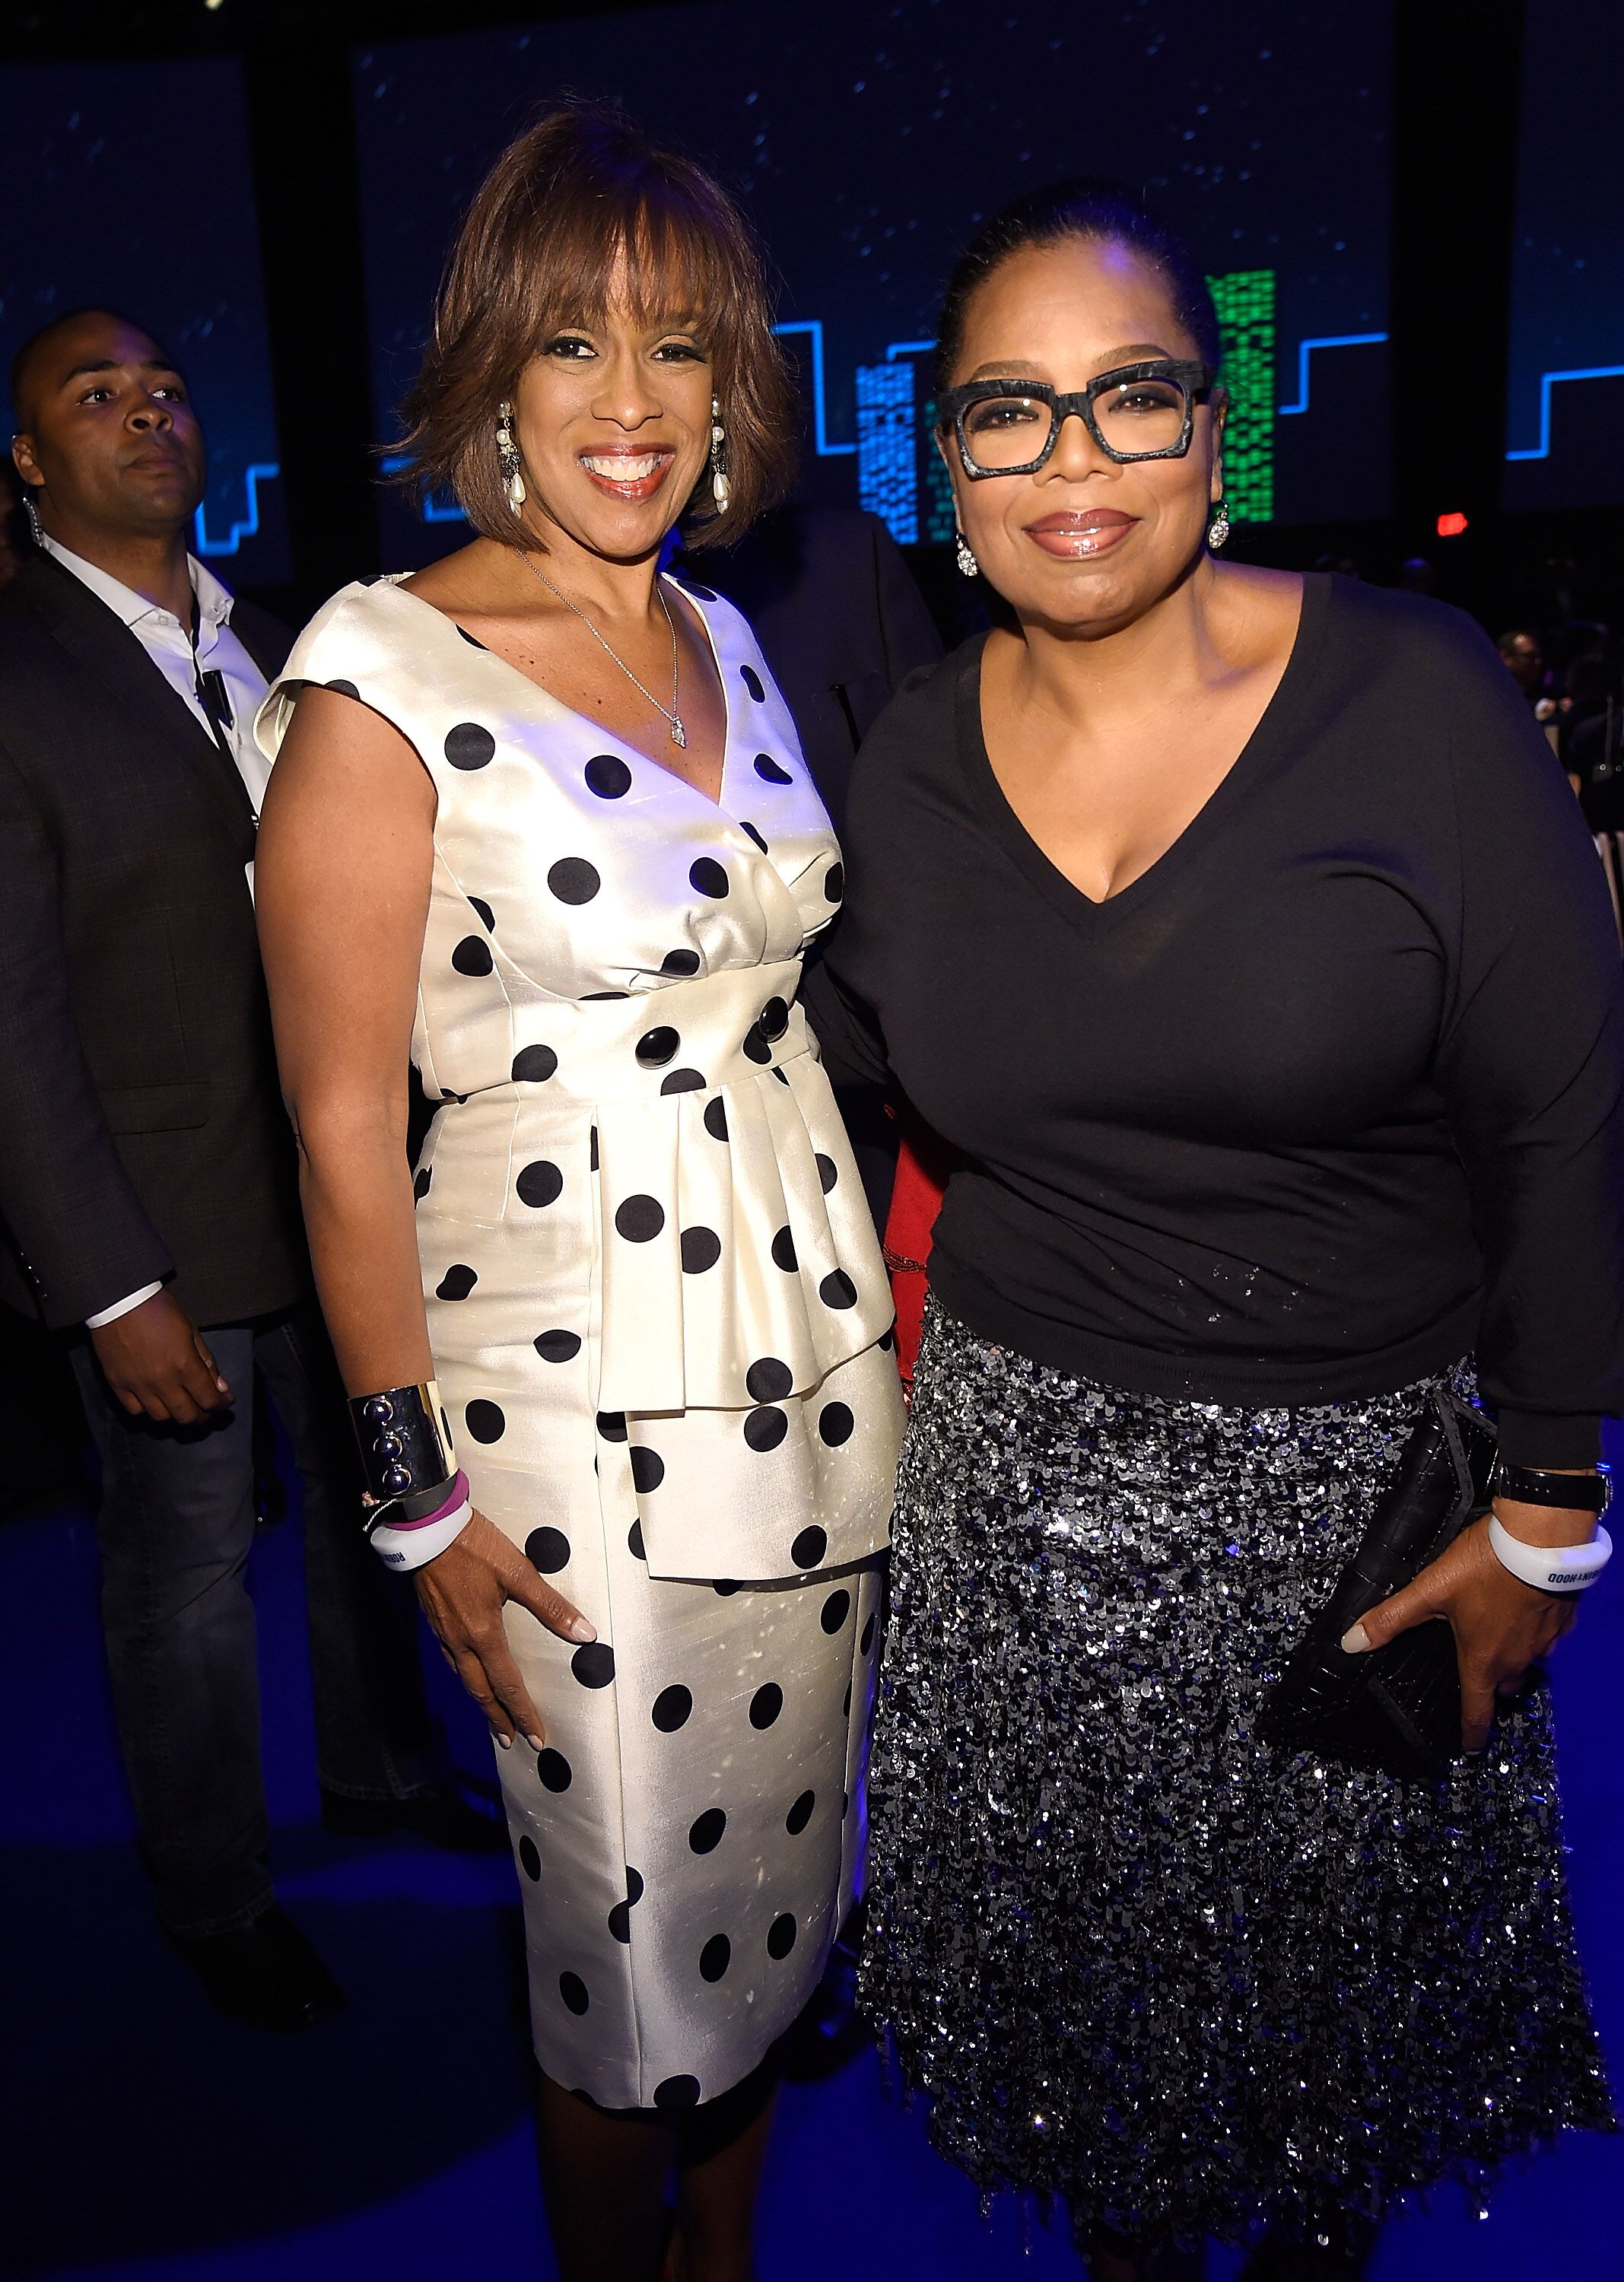 Gayle King and Oprah Winfrey at The Robin Hood Foundation's 2016 Benefit. | Source: Getty Images